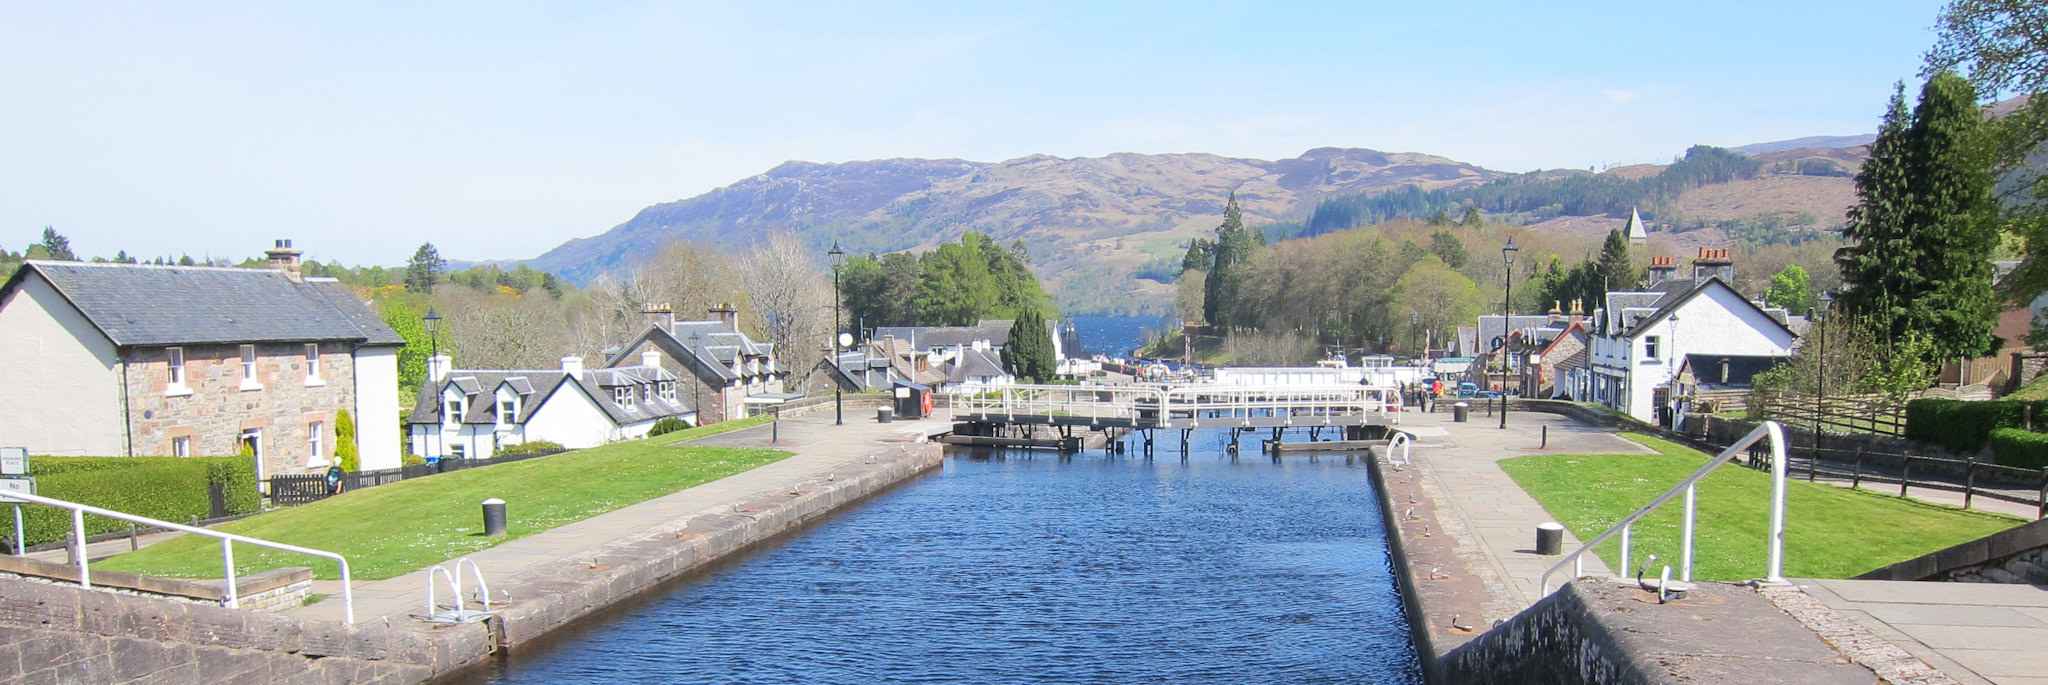 Fort Augustus in the Scottish Highlands